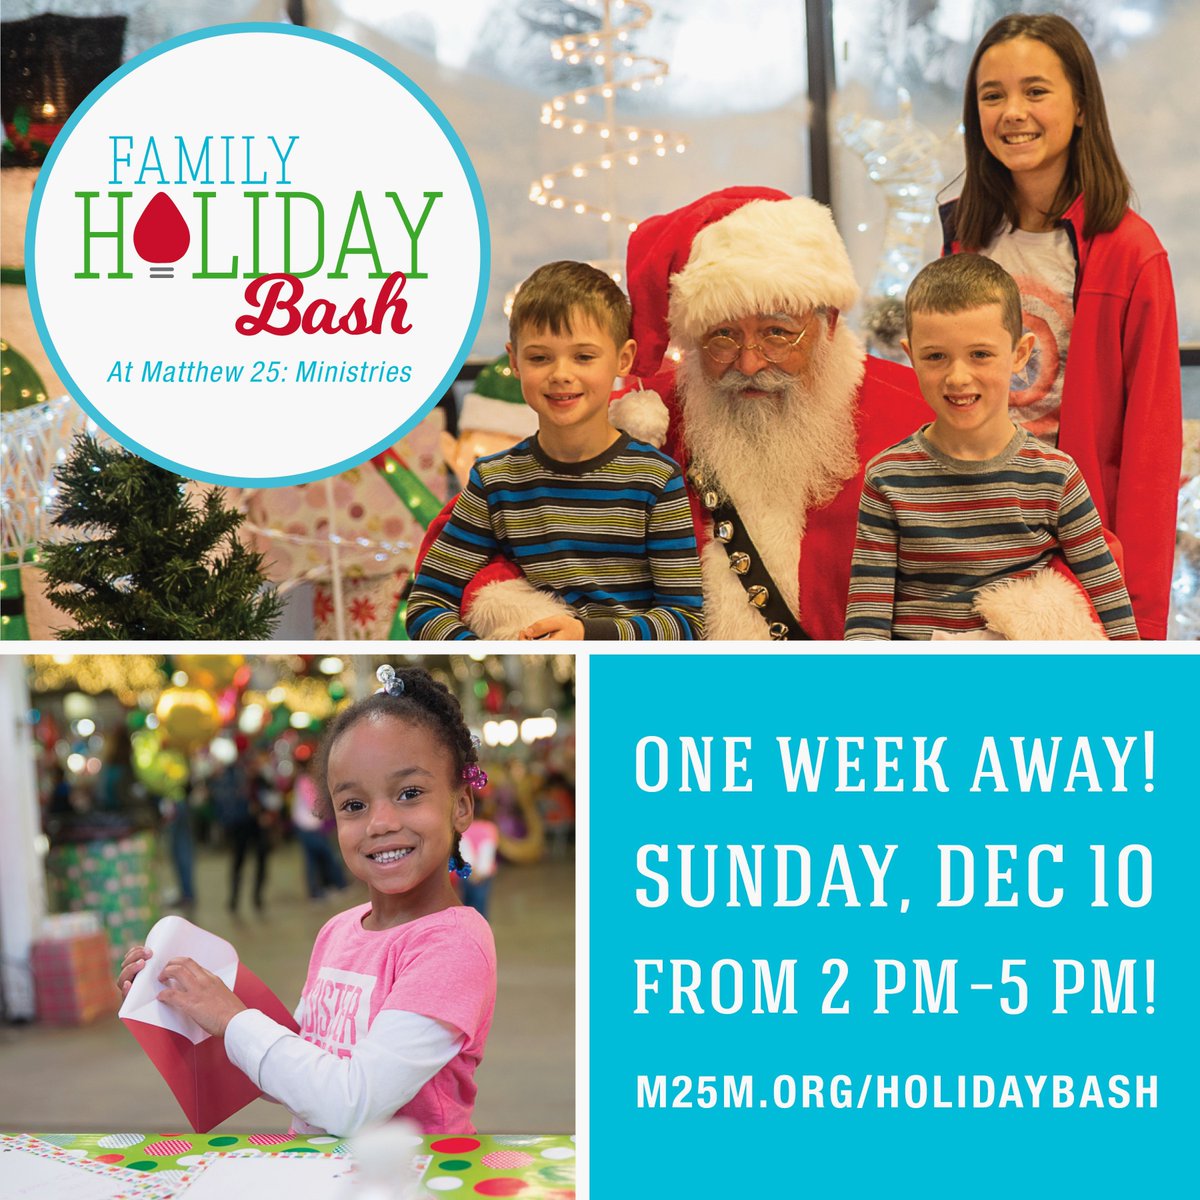 Join us for our Family Holiday Bash at Matthew 25 on 12/10 from 2 PM - 5 PM! Enjoy a magical wonderland, including photos with Santa, games, a candy forest, and more 🎄 Free admission, with donations being accepted to benefit A Kid Again's work. Visit m25m.org/holidaybash.